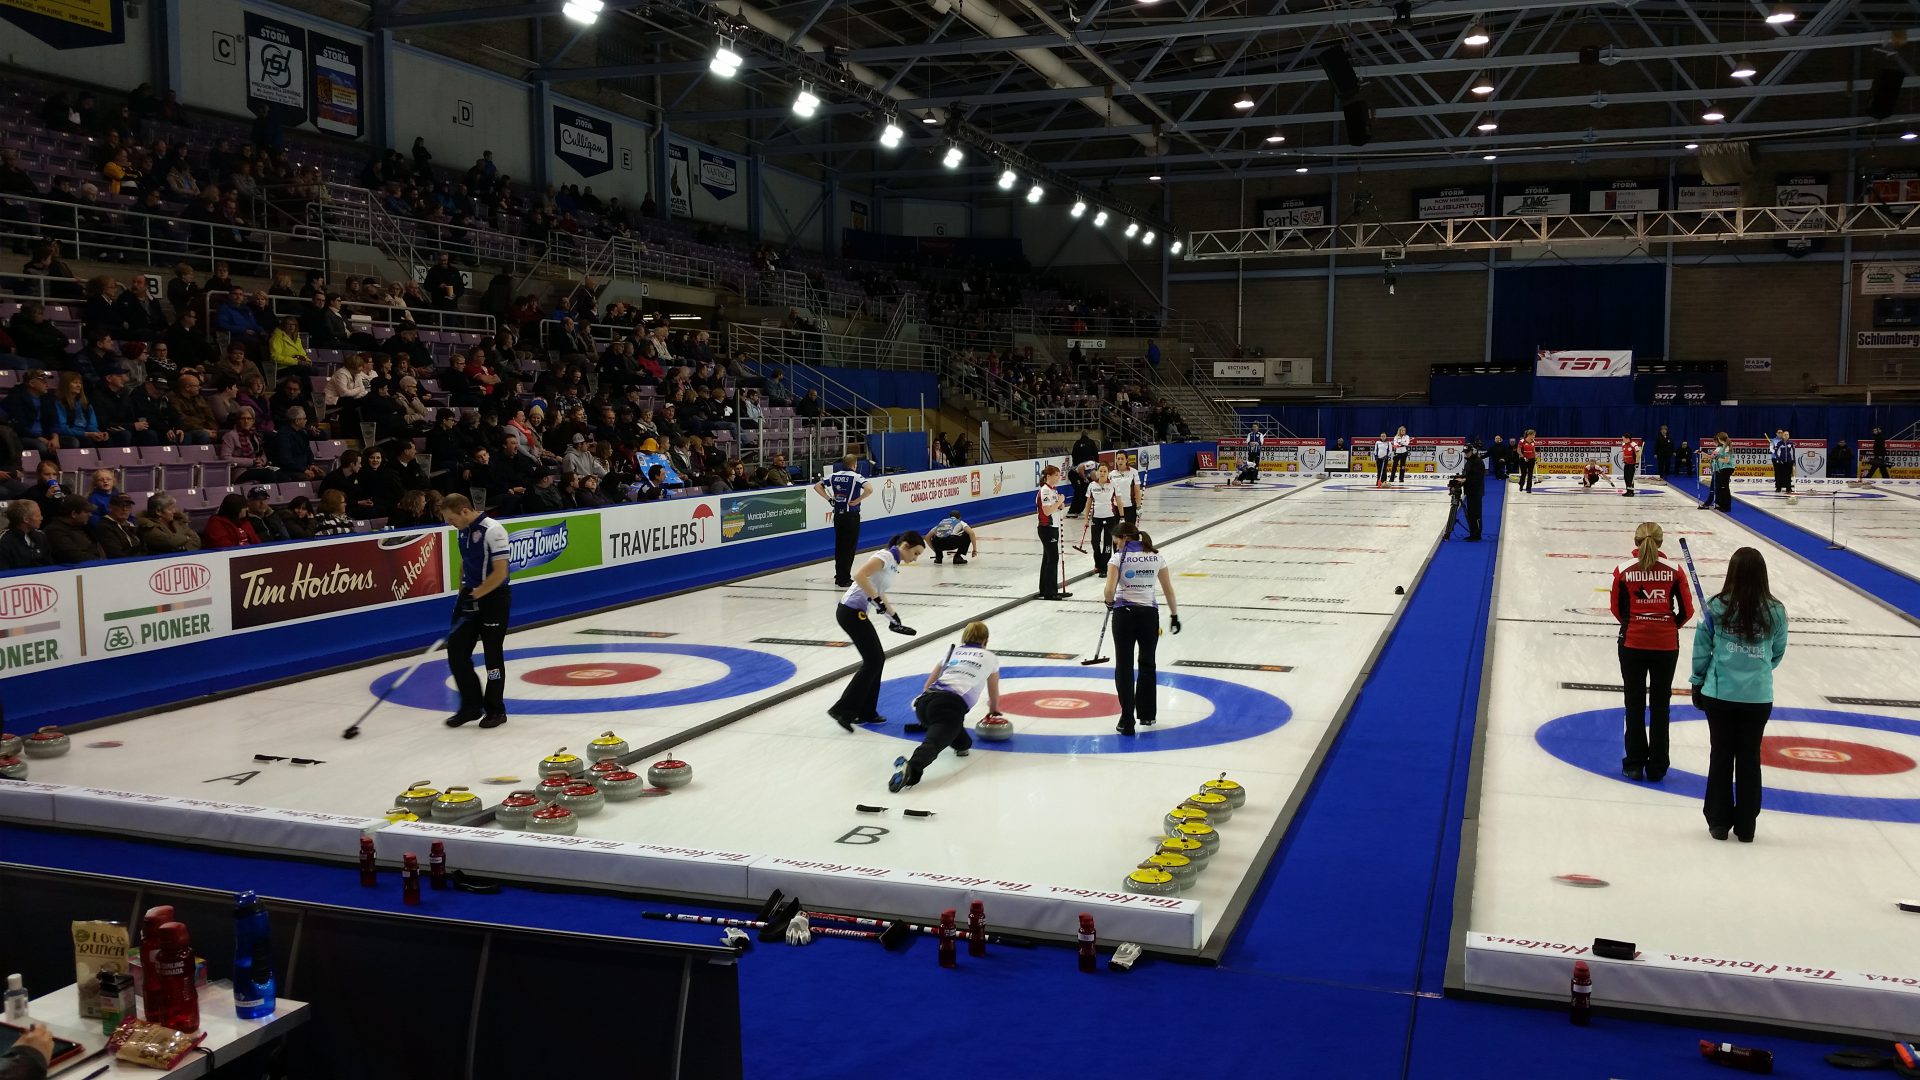 Sweeting, Simmons improve to 3-1 at Home Hardware Canada Cup